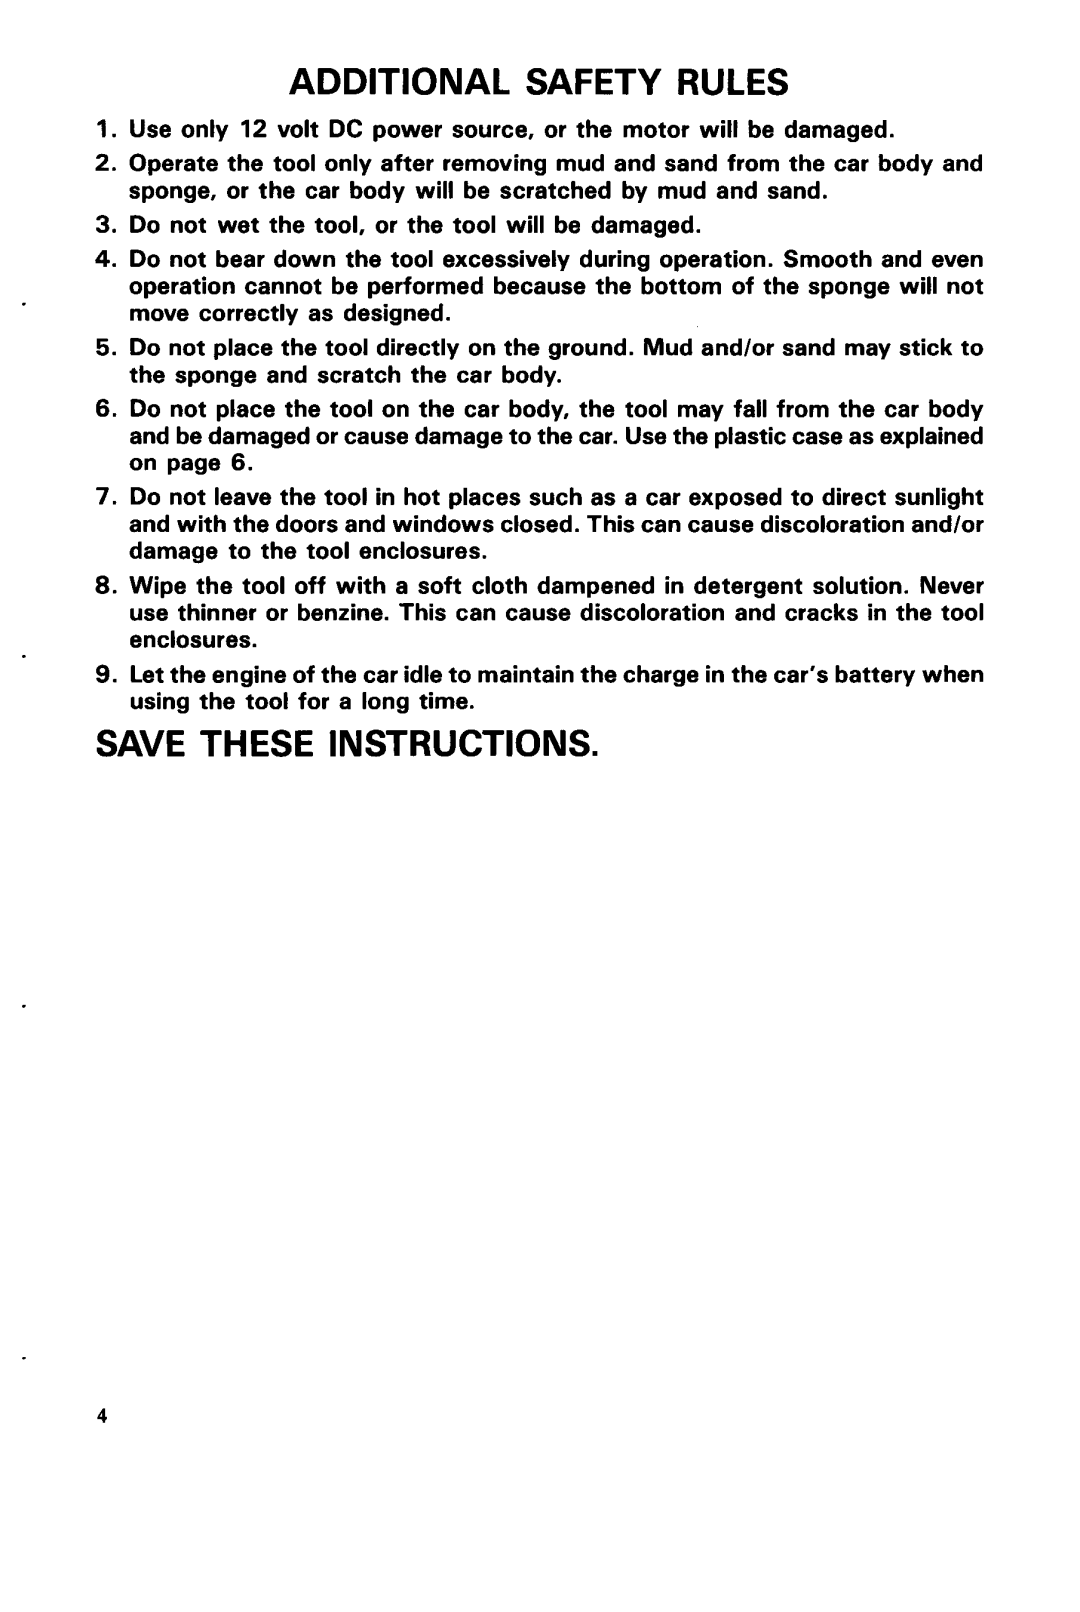 Makita 9200Y instruction manual Additional Safety Rules, Save These Instructions 